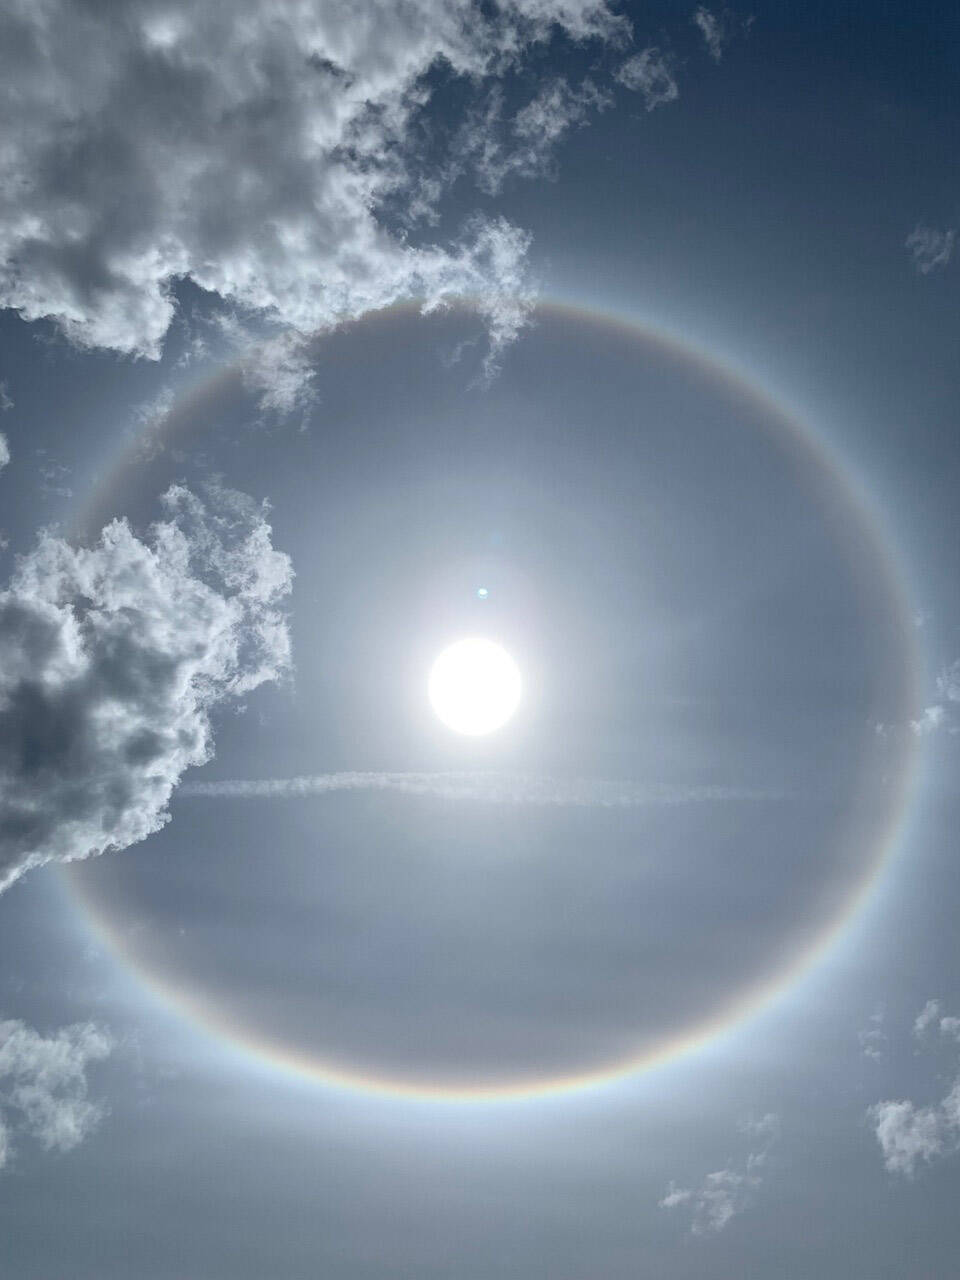 This sun halo was seen in Chilliwack on Wednesday, June 1, 2022. (Monica Little)